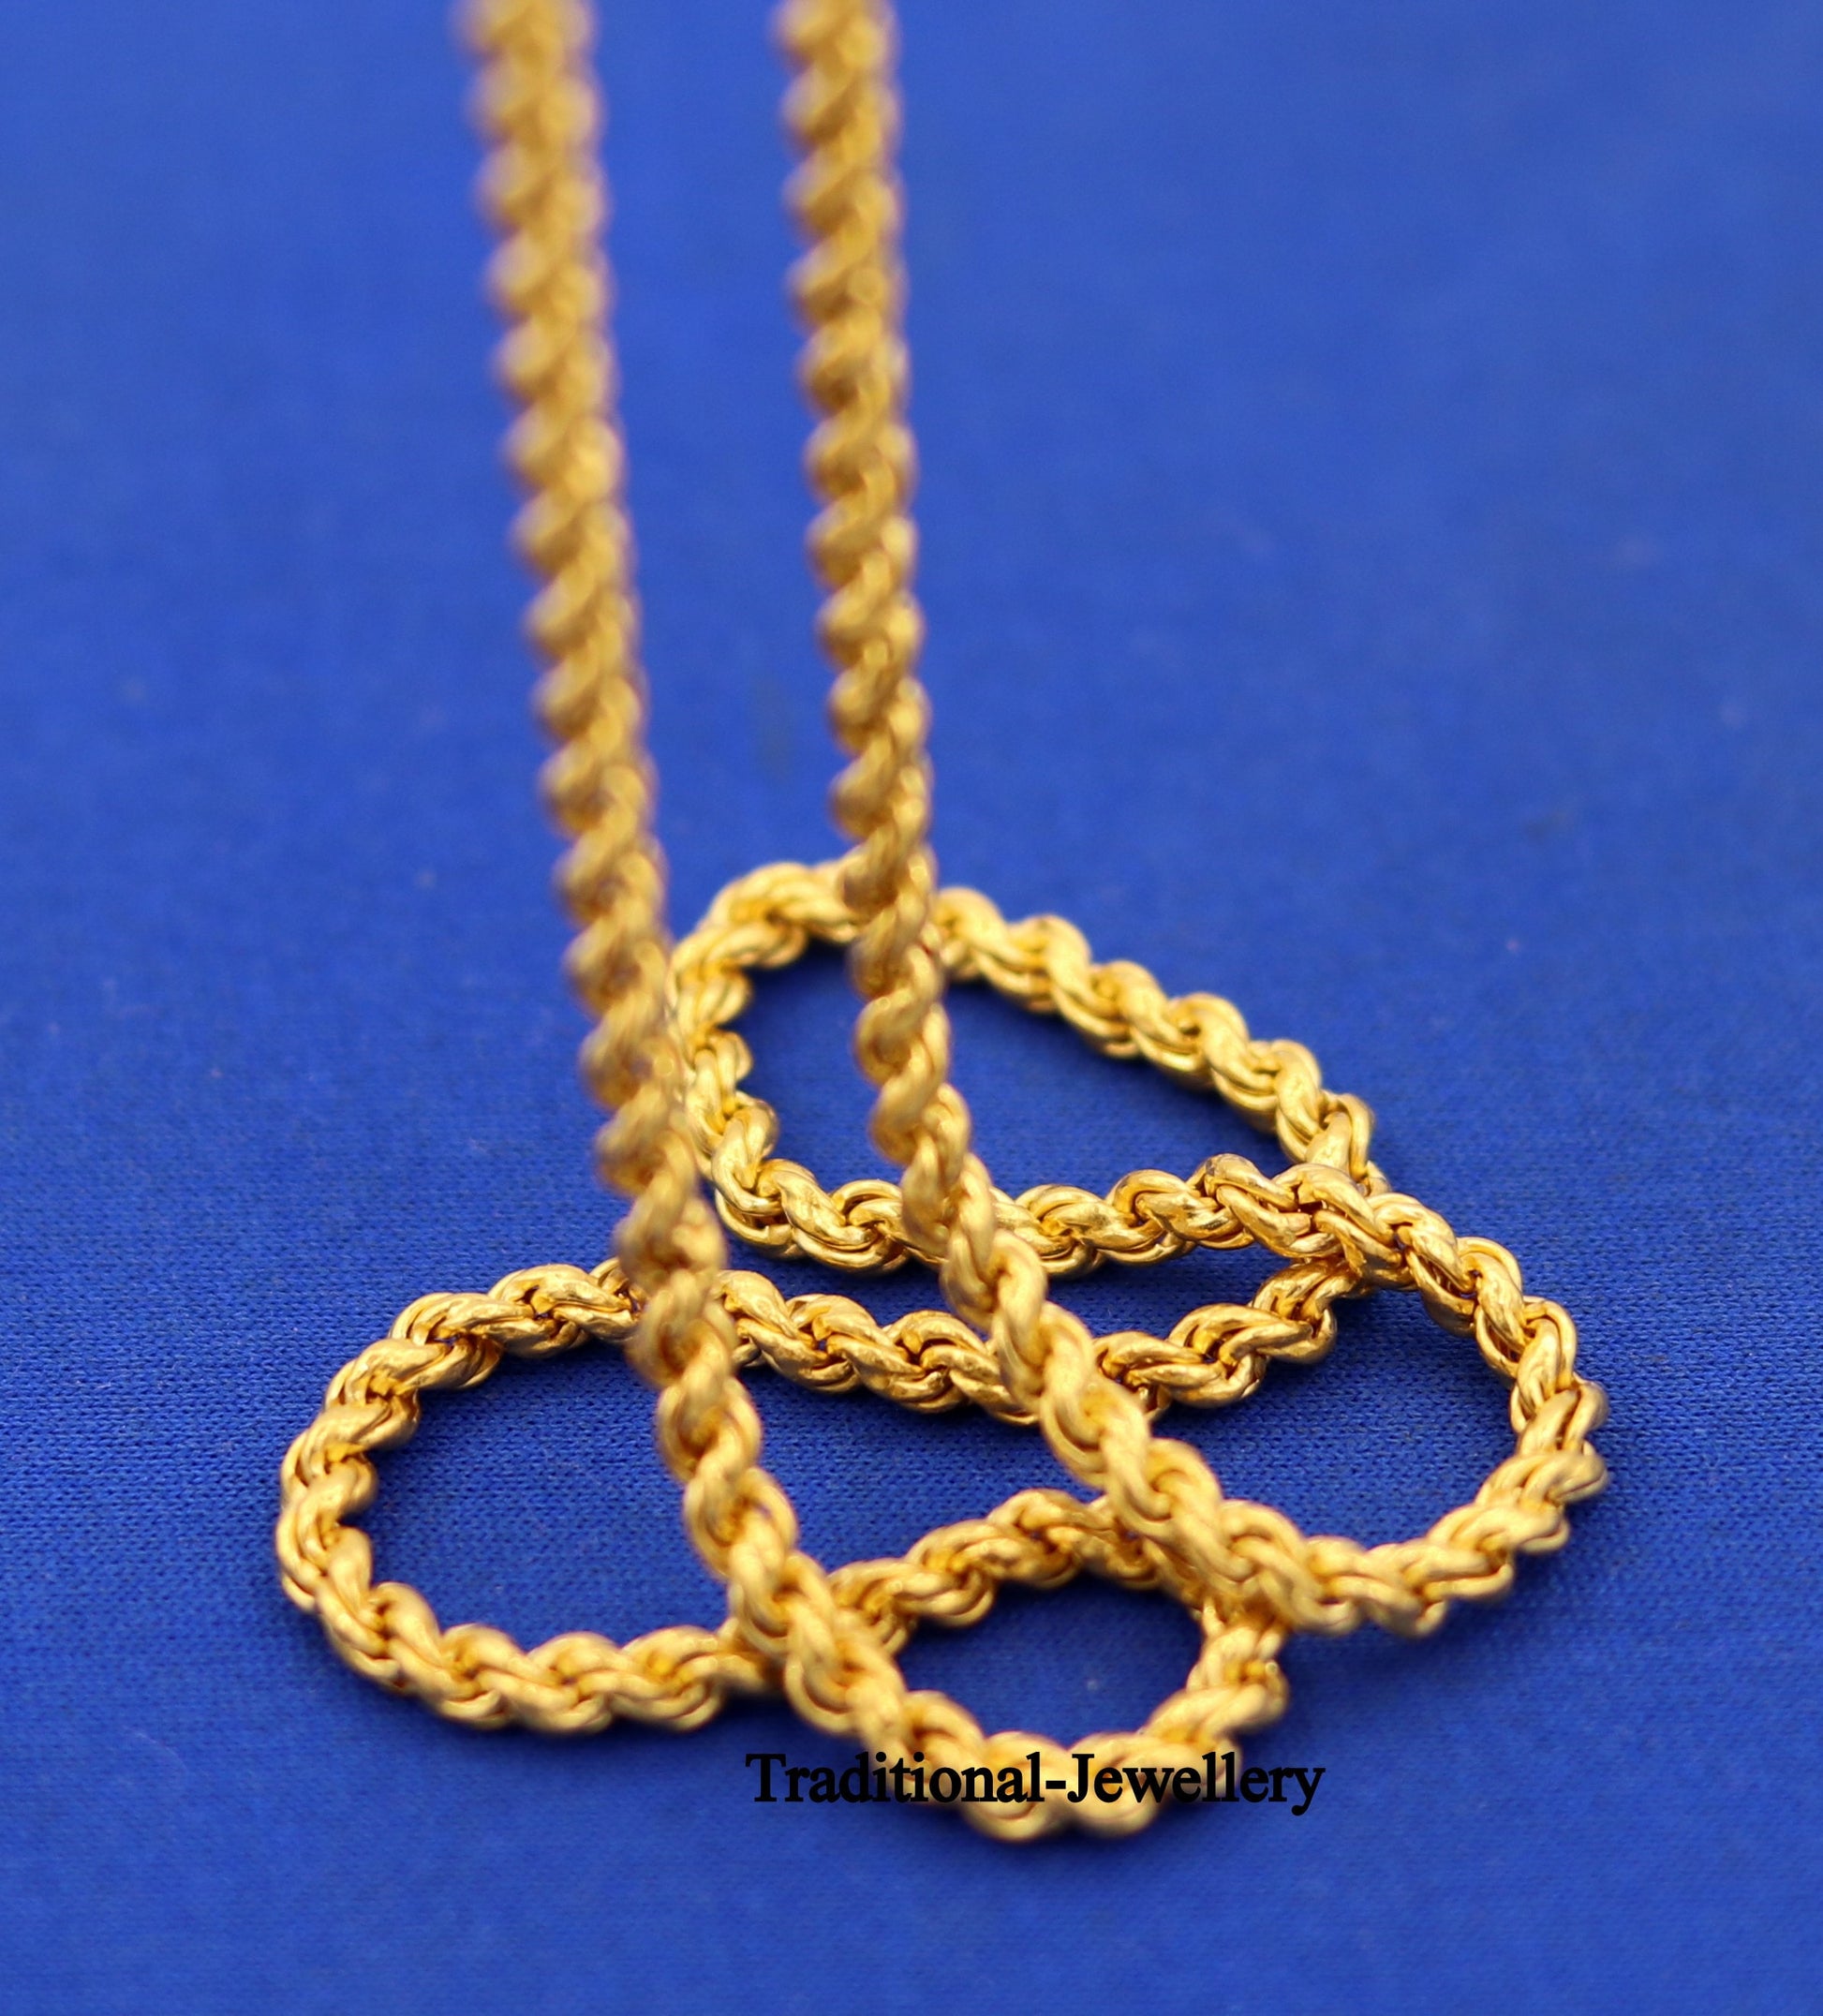 22karat yellow gold handmade fabulous rope chain necklace long excellent 3mm wide gold unisex chain ch164 - TRIBAL ORNAMENTS